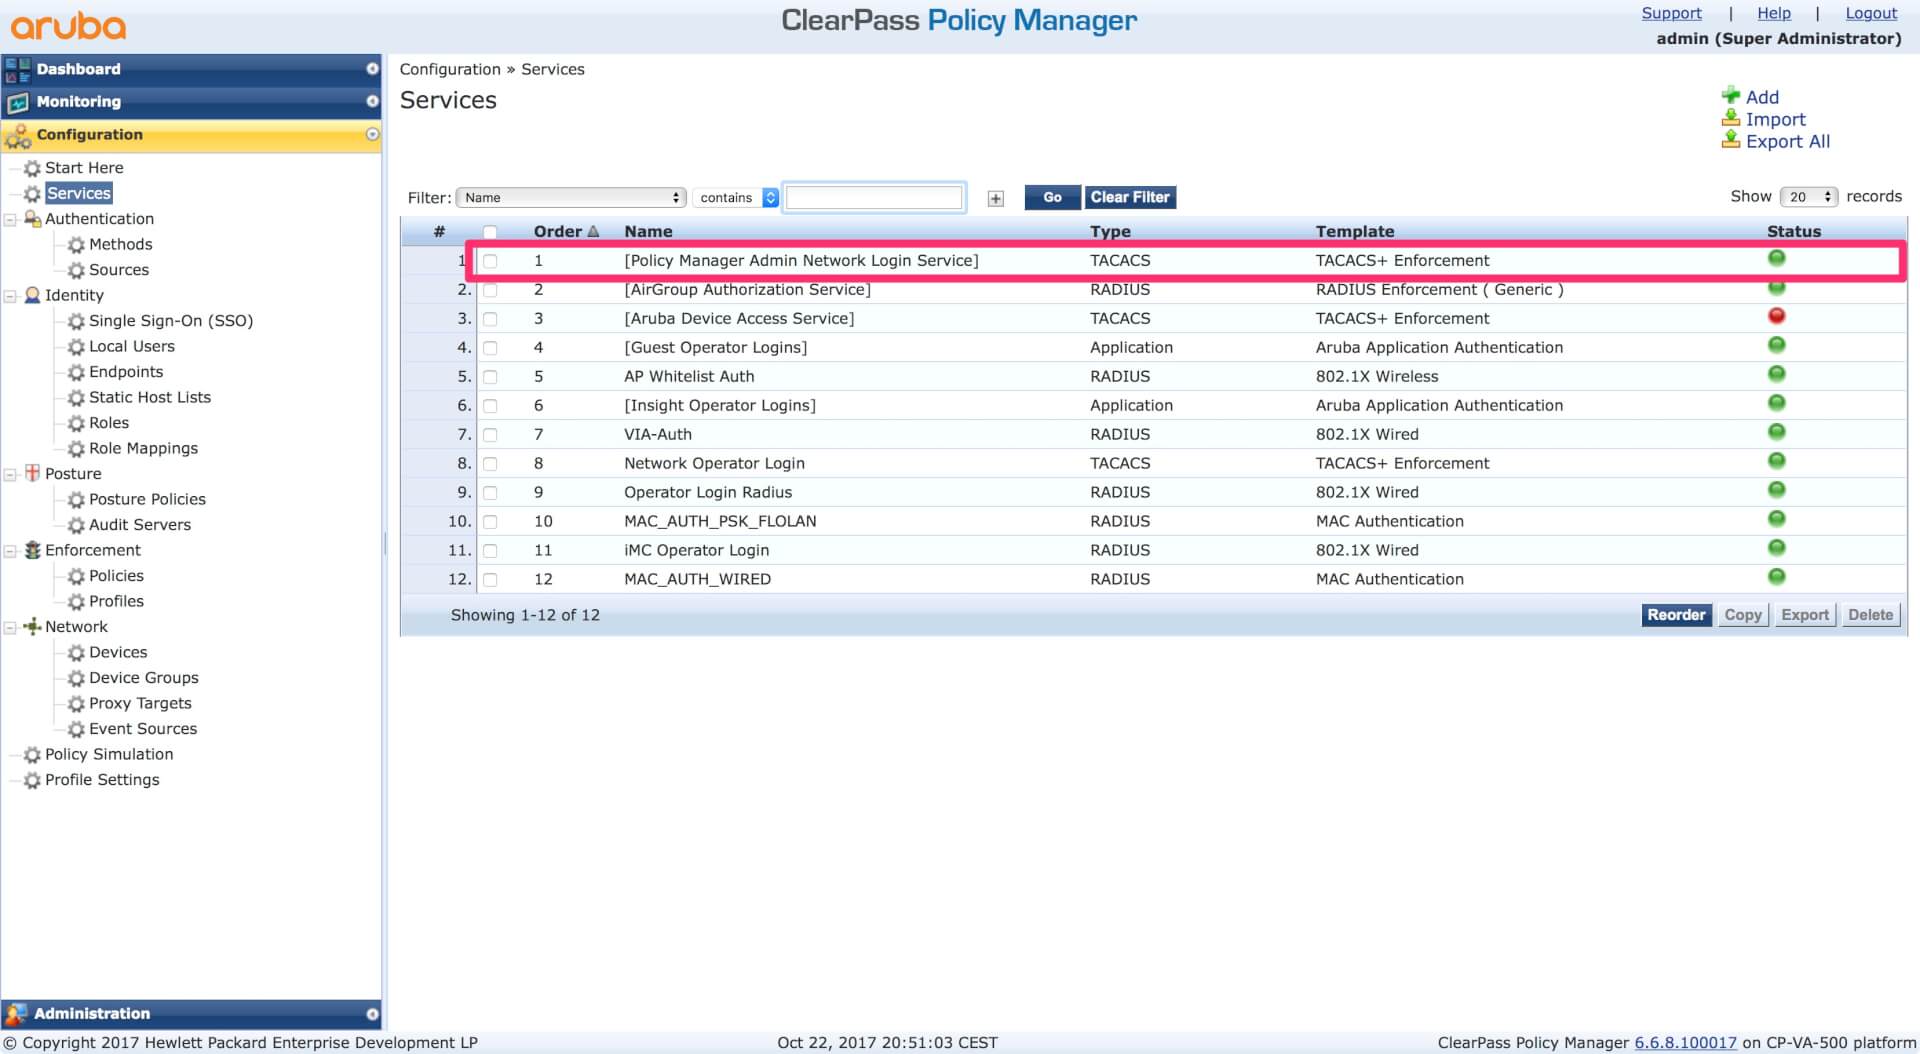 Clearpass Operator Login - Policy Manager Admin Network Login Service